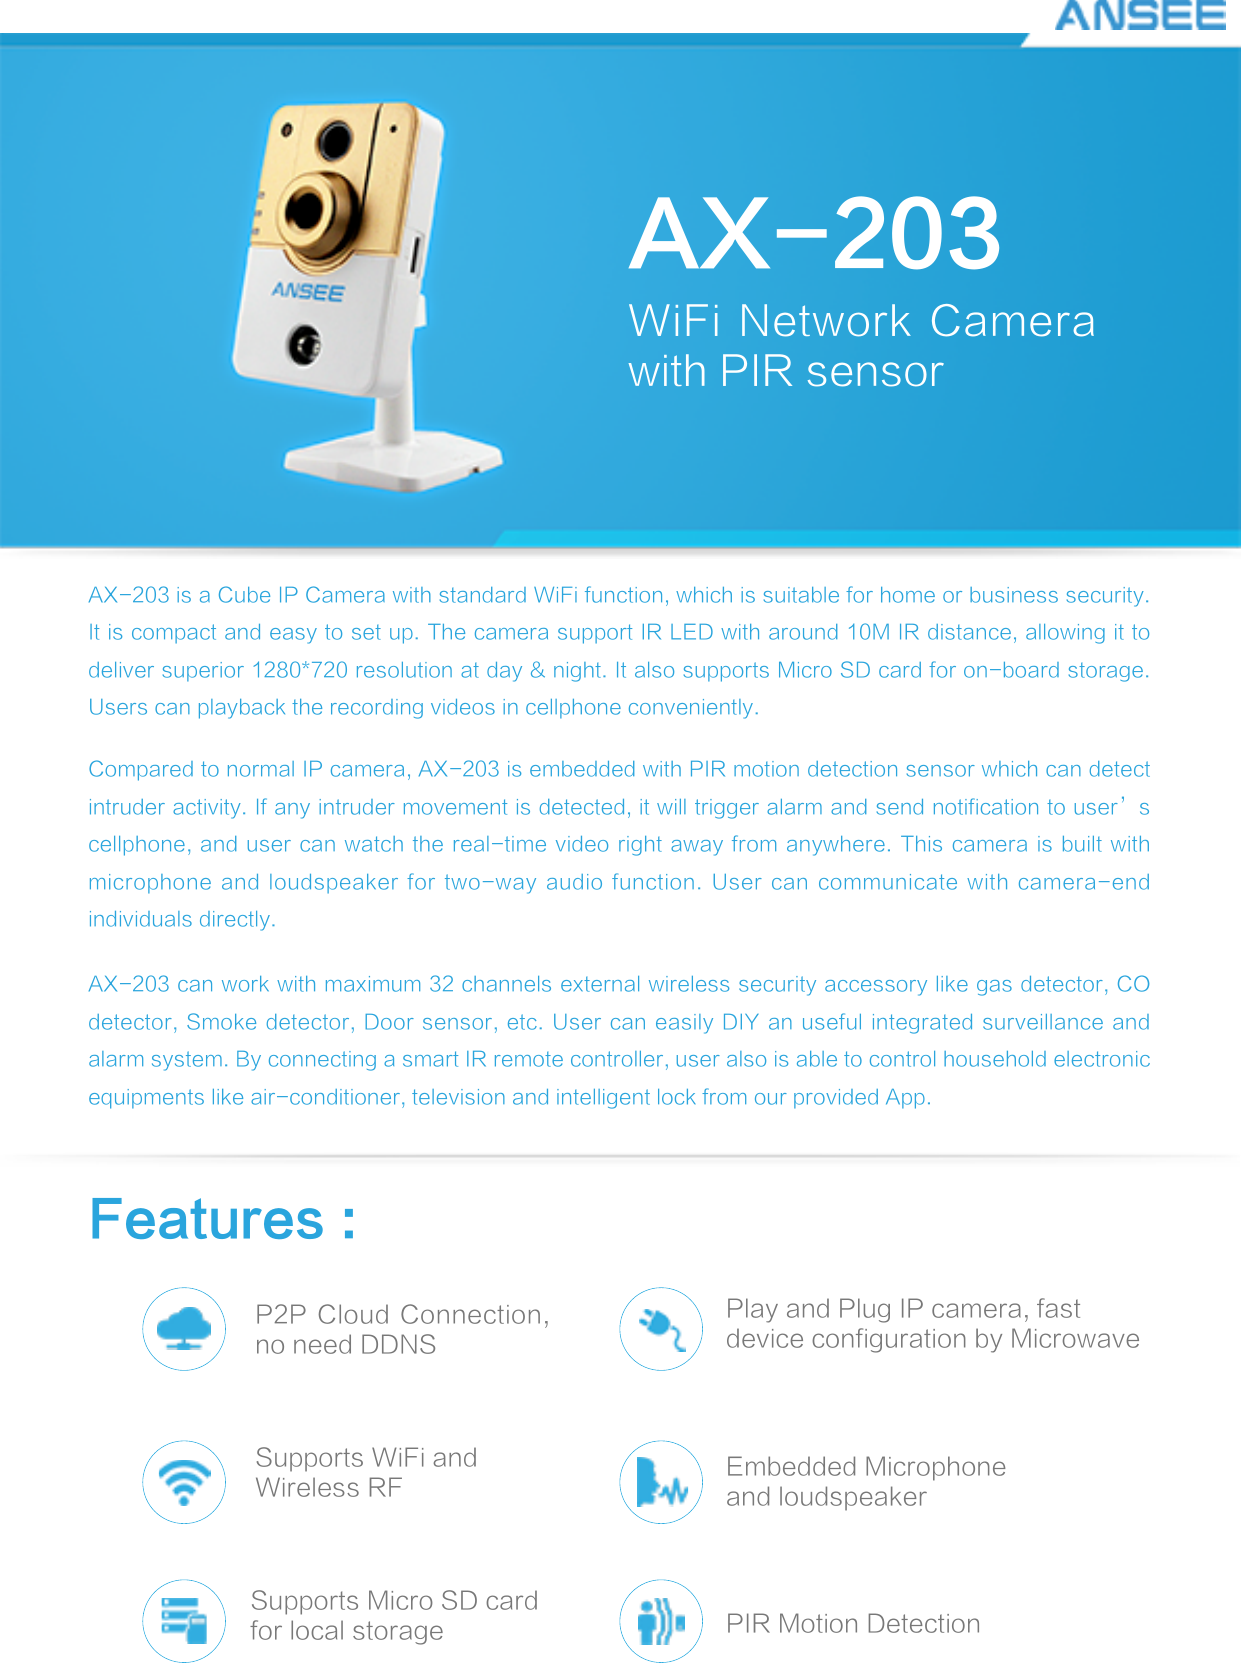 AX-203WiFi Network Camera with PIR sensorAX-203 is a Cube IP Camera with standard WiFi function, which is suitable for home or business security. It is compact and easy to set up. The camera support IR LED with around 10M IR distance, allowing it to deliver superior 1280*720 resolution at day &amp; night. It also supports Micro SD card for on-board storage. Users can playback the recording videos in cellphone conveniently.Compared to normal IP camera, AX-203 is embedded with PIR motion detection sensor which can detect intruder activity. If any intruder movement is detected, it will trigger alarm and send notification to user’s cellphone, and user can watch the real-time video right away from anywhere. This camera is built with microphone and loudspeaker for two-way  audio  function. User can communicate with  camera-end individuals directly.AX-203 can work with maximum 32 channels external wireless security accessory like gas detector, CO detector, Smoke detector, Door sensor, etc. User can easily DIY an useful integrated surveillance and alarm system. By connecting a smart IR remote controller, user also is able to control household electronic equipments like air-conditioner, television and intelligent lock from our provided App.Features :P2P Cloud Connection, no need DDNSSupports WiFi andWireless RFSupports Micro SD cardfor local storagePlay and Plug IP camera, fast device configuration by MicrowaveEmbedded Microphoneand loudspeakerPIR Motion Detection